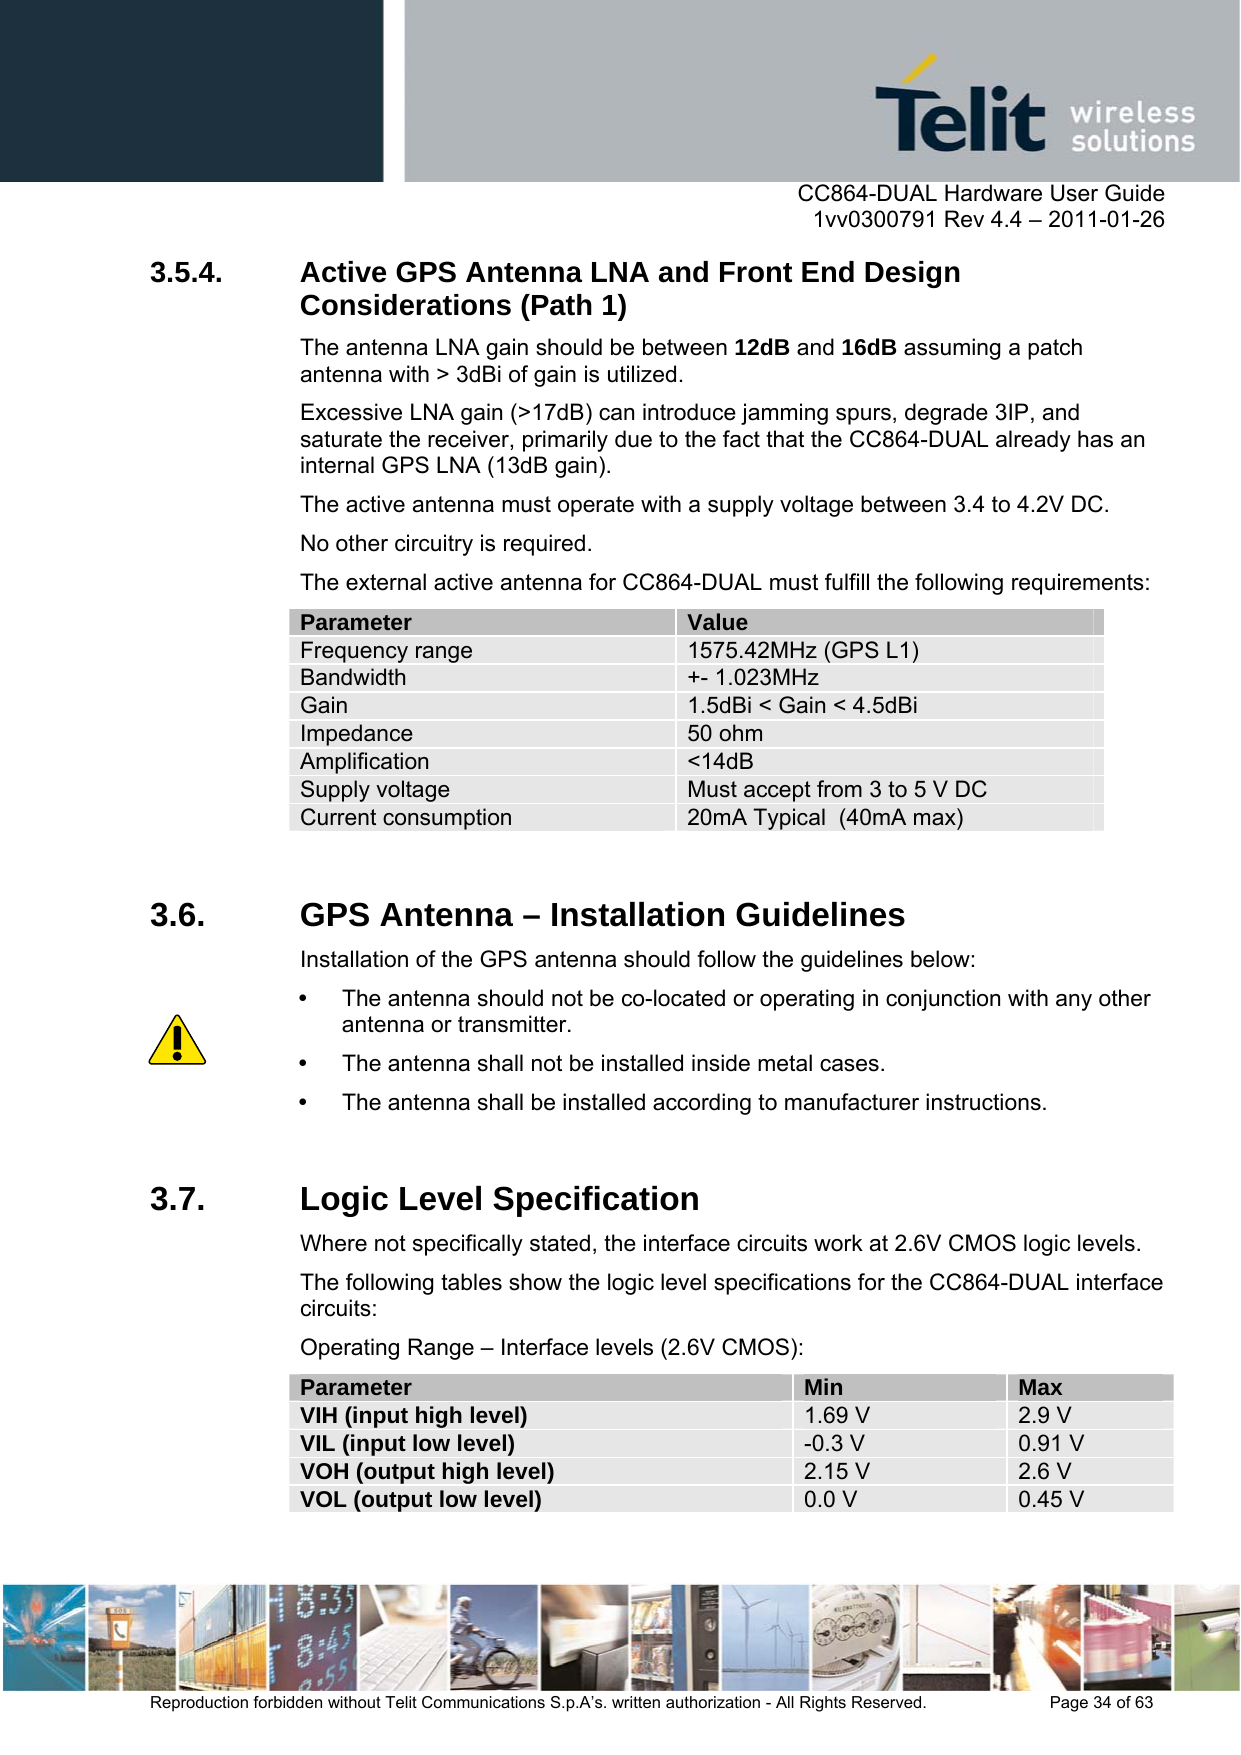      CC864-DUAL Hardware User Guide    1vv0300791 Rev 4.4 – 2011-01-26  Reproduction forbidden without Telit Communications S.p.A’s. written authorization - All Rights Reserved.    Page 34 of 63  3.5.4. Active GPS Antenna LNA and Front End Design Considerations (Path 1) The antenna LNA gain should be between 12dB and 16dB assuming a patch antenna with &gt; 3dBi of gain is utilized. Excessive LNA gain (&gt;17dB) can introduce jamming spurs, degrade 3IP, and saturate the receiver, primarily due to the fact that the CC864-DUAL already has an internal GPS LNA (13dB gain). The active antenna must operate with a supply voltage between 3.4 to 4.2V DC. No other circuitry is required.  The external active antenna for CC864-DUAL must fulfill the following requirements: Parameter  Value Frequency range  1575.42MHz (GPS L1) Bandwidth  +- 1.023MHz Gain  1.5dBi &lt; Gain &lt; 4.5dBi Impedance  50 ohm Amplification  &lt;14dB Supply voltage  Must accept from 3 to 5 V DC Current consumption  20mA Typical  (40mA max)  3.6.  GPS Antenna – Installation Guidelines Installation of the GPS antenna should follow the guidelines below:   The antenna should not be co-located or operating in conjunction with any other antenna or transmitter.   The antenna shall not be installed inside metal cases.    The antenna shall be installed according to manufacturer instructions.   3.7.  Logic Level Specification Where not specifically stated, the interface circuits work at 2.6V CMOS logic levels.  The following tables show the logic level specifications for the CC864-DUAL interface circuits: Operating Range – Interface levels (2.6V CMOS): Parameter  Min  Max VIH (input high level)  1.69 V  2.9 V VIL (input low level)  -0.3 V  0.91 V VOH (output high level)  2.15 V  2.6 V VOL (output low level)  0.0 V  0.45 V  